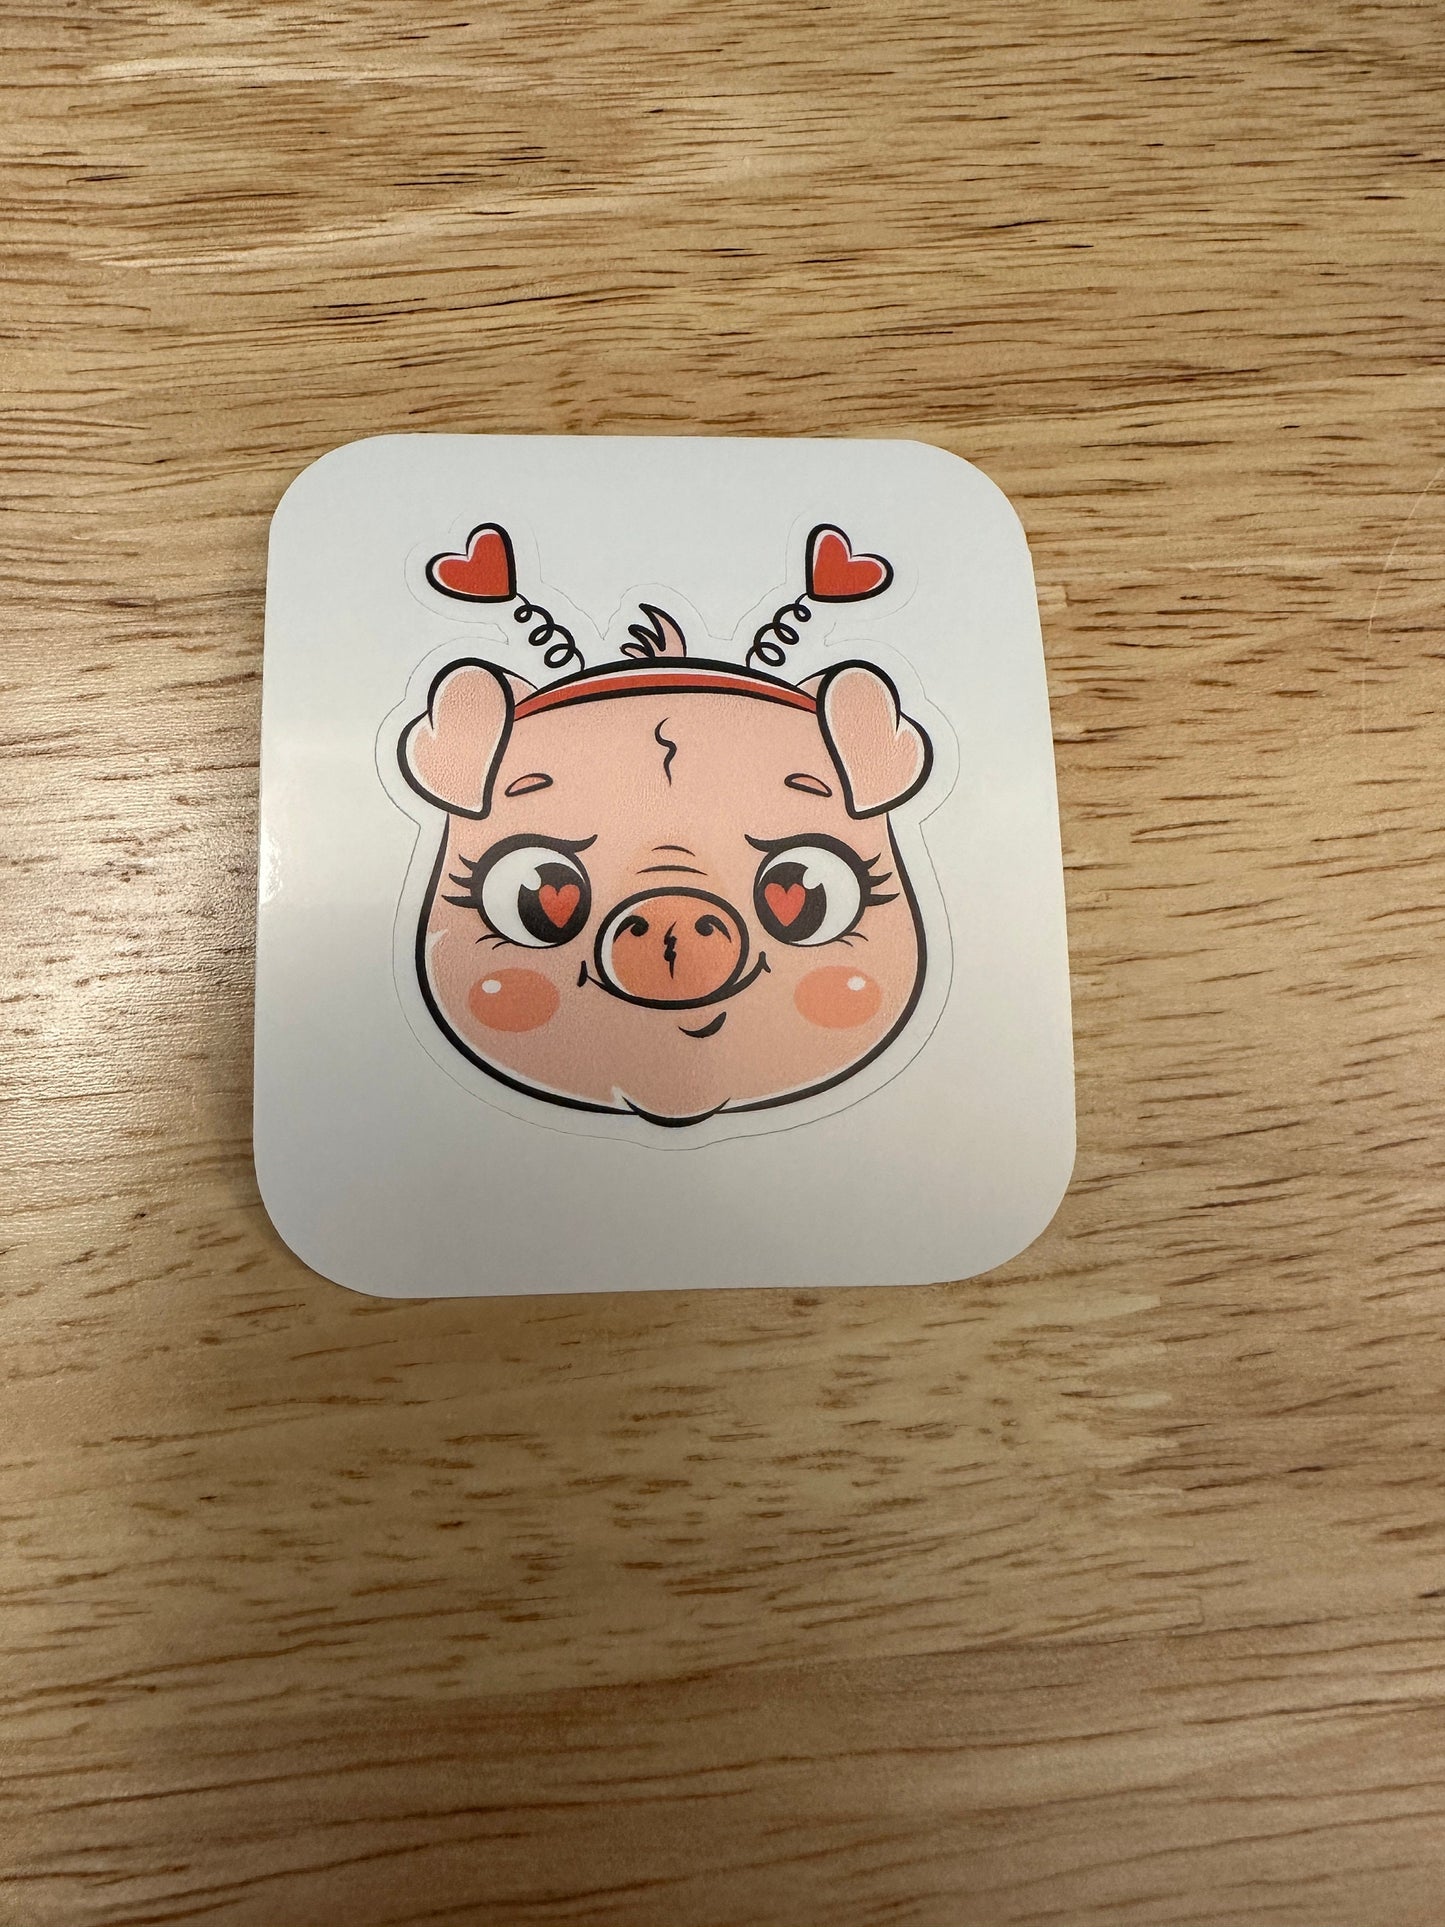 Cute Pig with hearts STICKER, Cute Pig with paws sticker, Laptop sticker, Halographic option, Pig with headband